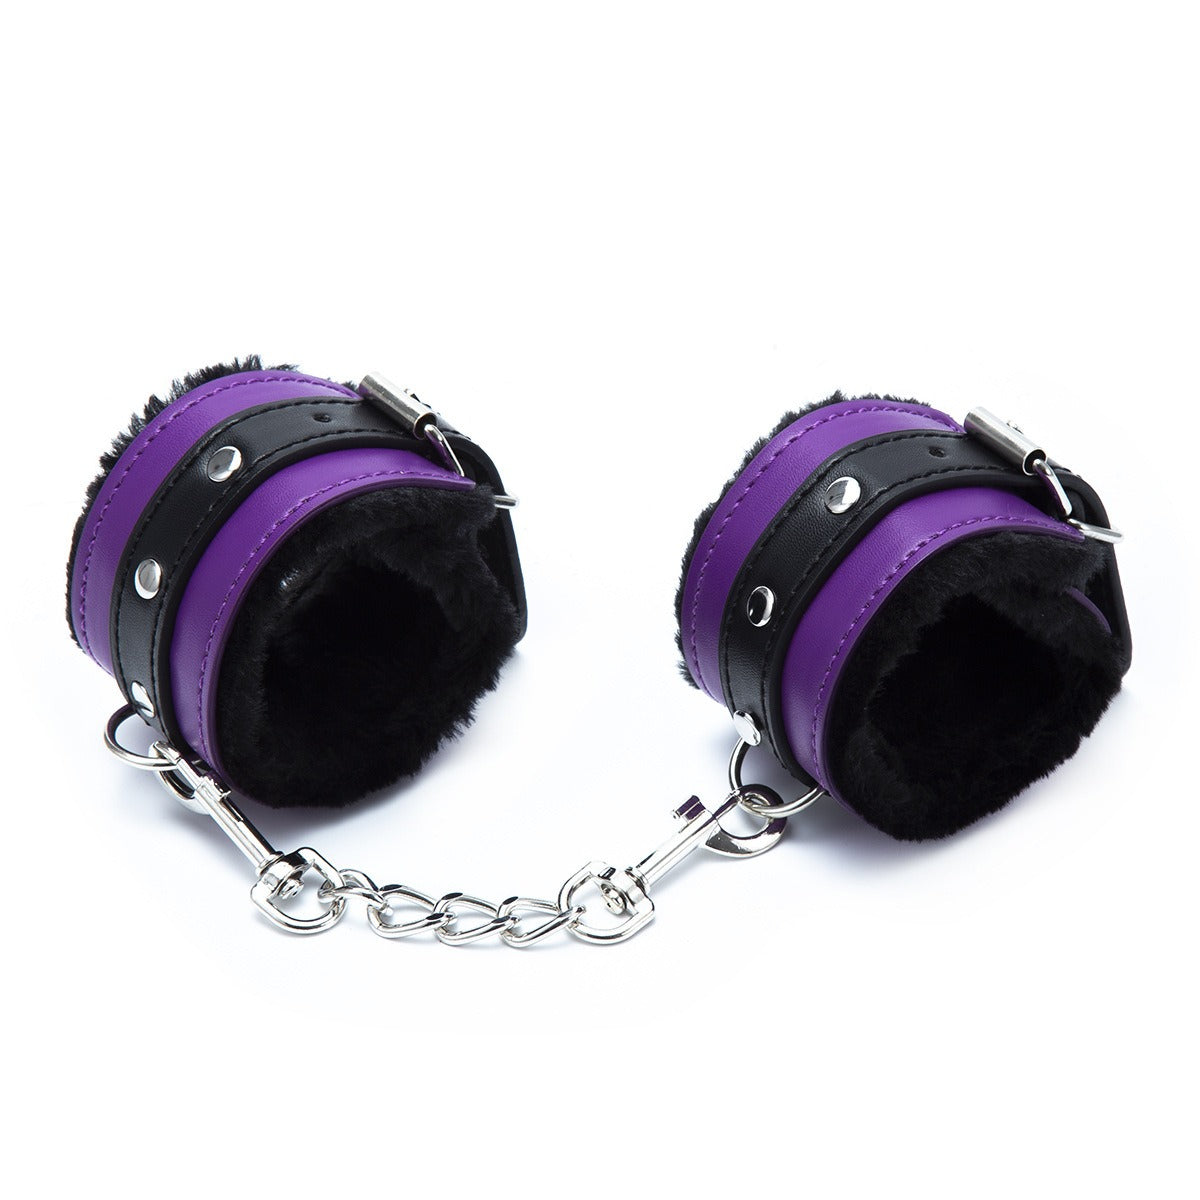 PU Leather Handcuffs and Ankles Set for Couple Games